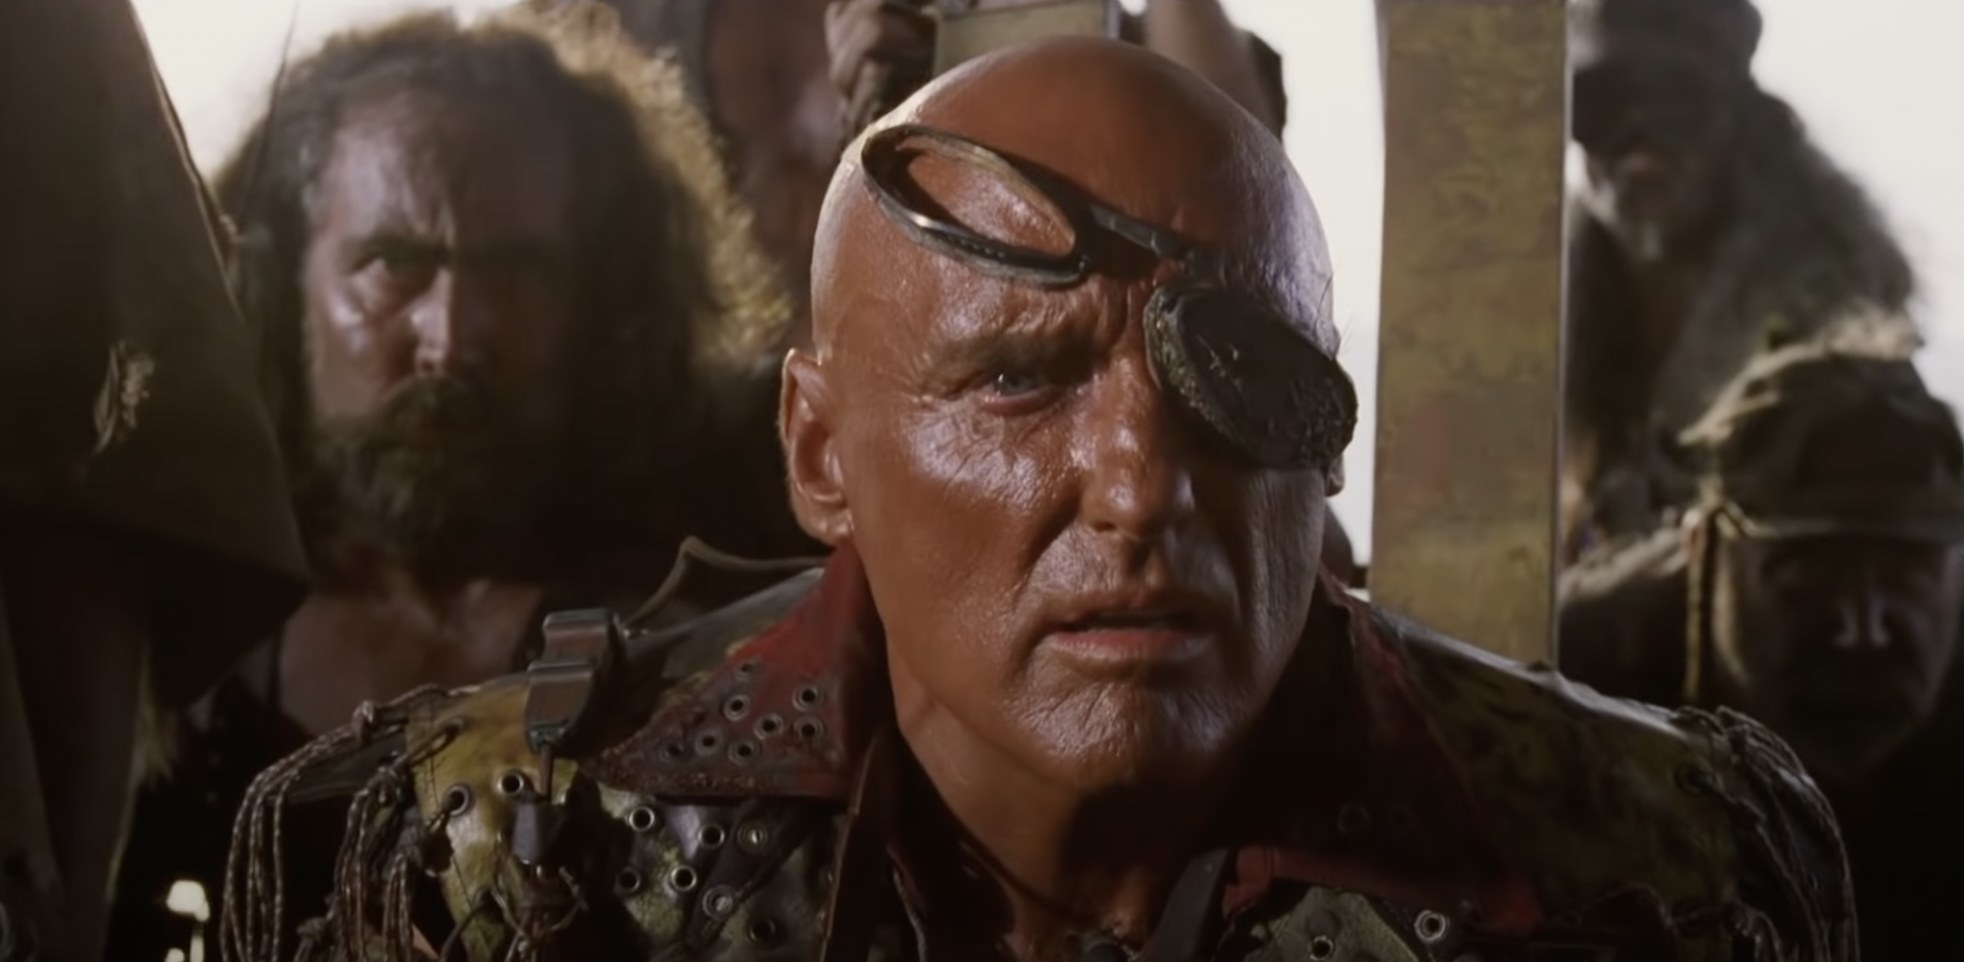 A man with an eyepatch